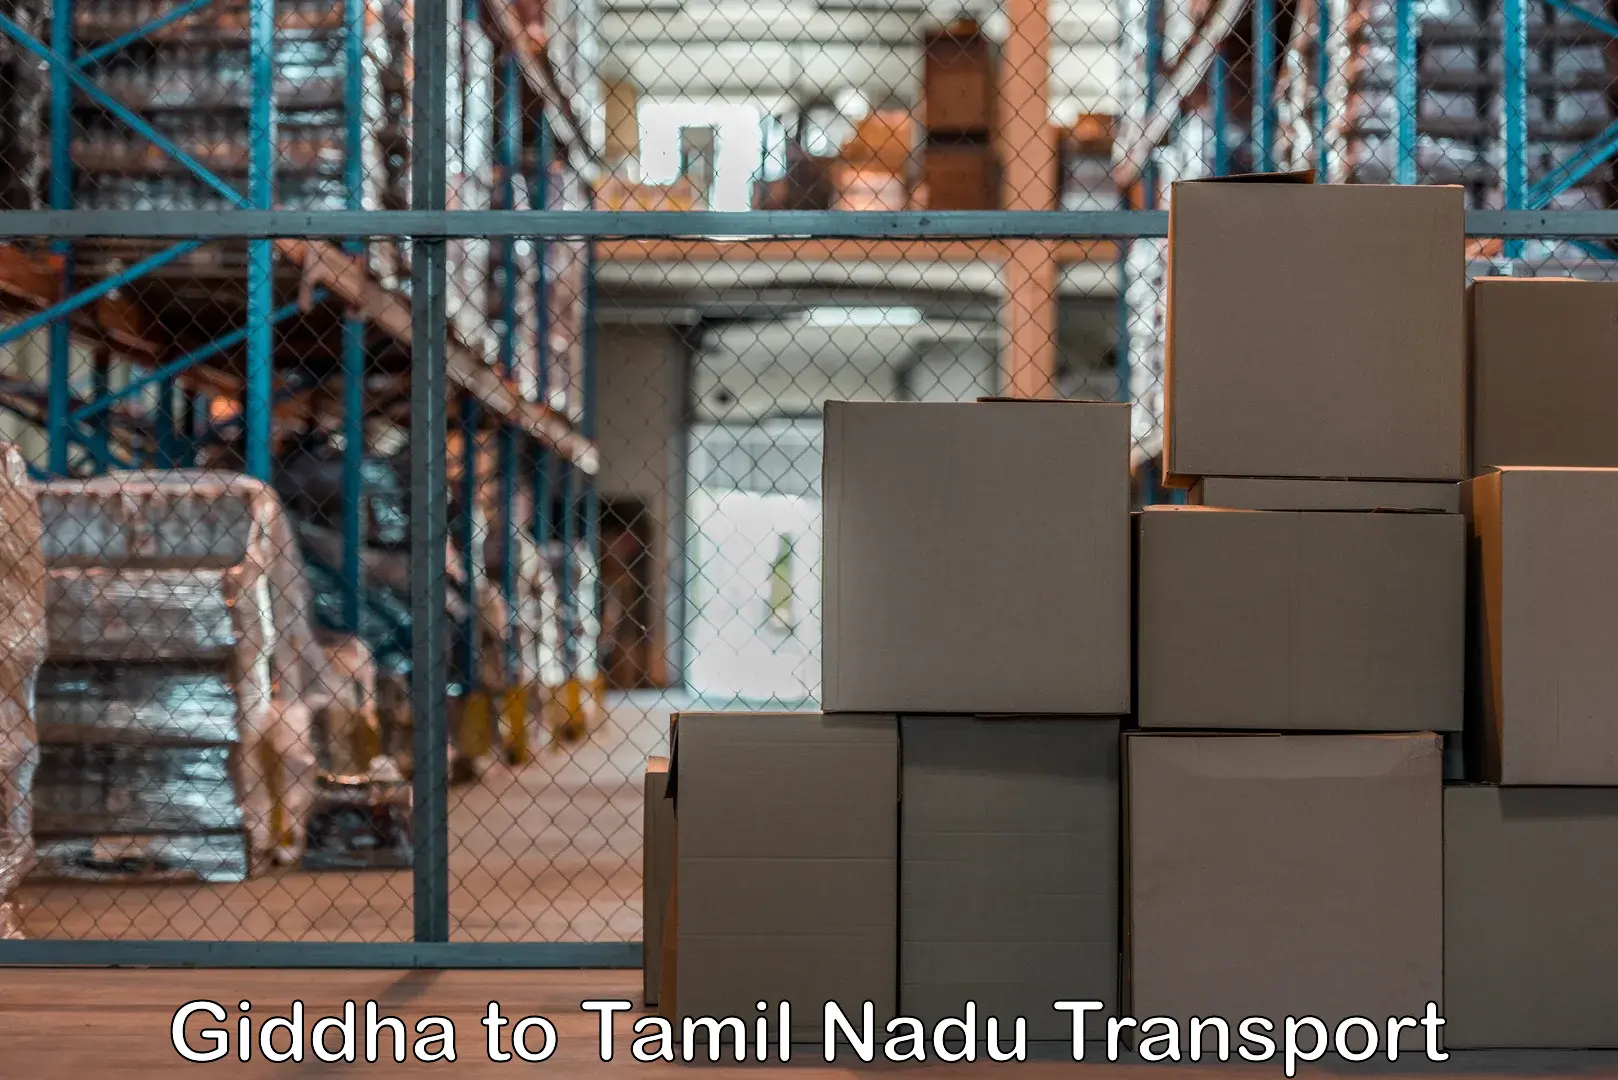 Daily transport service Giddha to Thisayanvilai